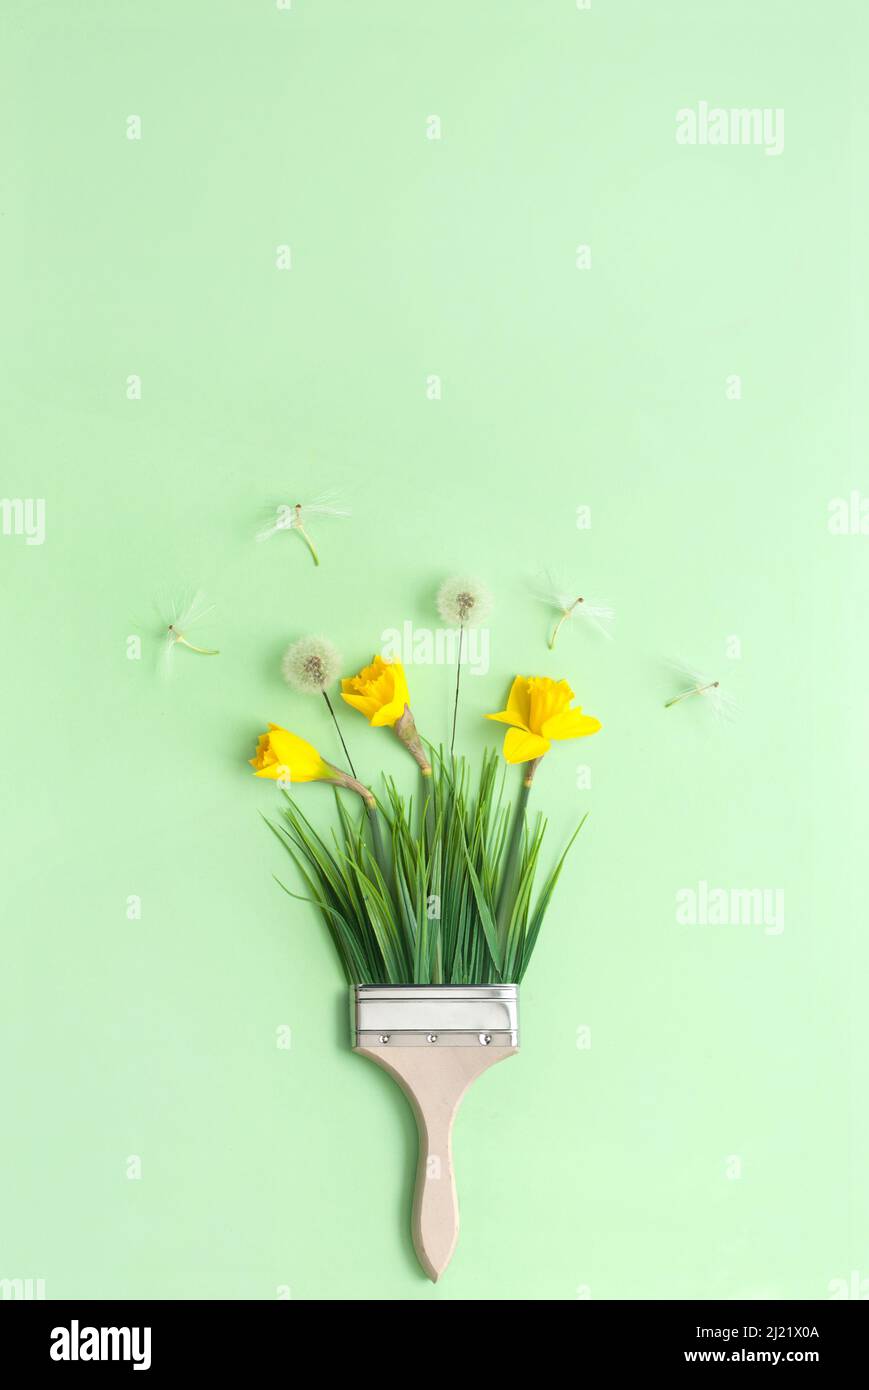 Paint brush with spring daffodils and dandelions Stock Photo